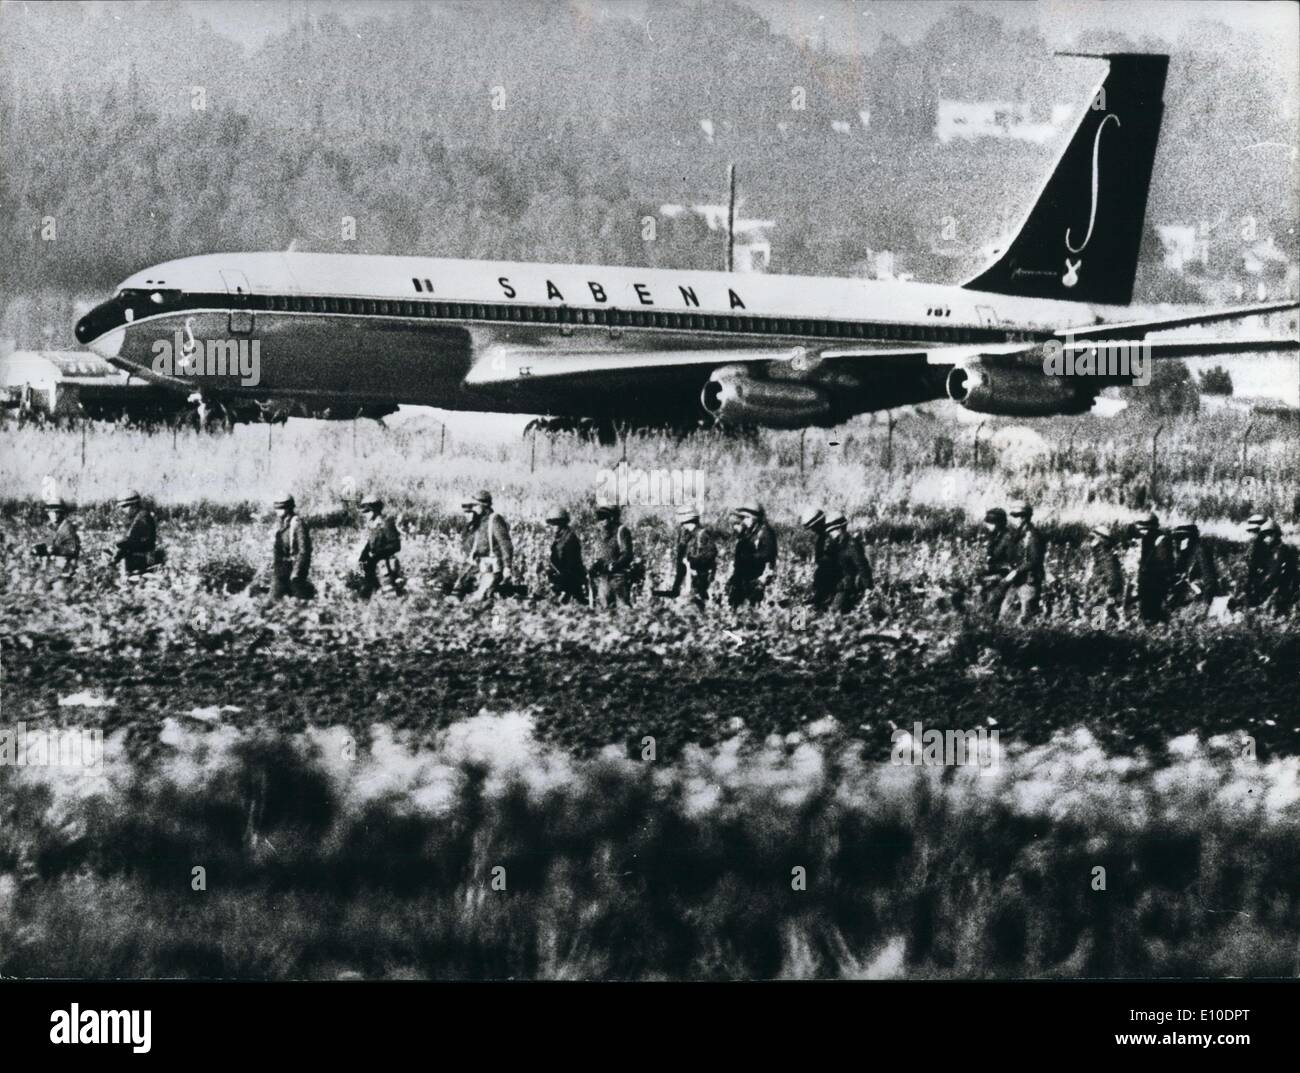 May 05, 1972 - Passengers Safe on Hijacked Plane : Israeli soldiers stormed four Arab commandos aboard the hijacked Sabena Airlines Boeing 707 airliner at Tel Avin airport, and shot and killed two of them. Two male terrorists died instantly. One girl hijacker was seriously injured and another girl captured. Both were carrying grenades. Only six of the 90 passengers were hurt and two soldiers were injured. The jet was seized on soldiers were injured. The jet was seized on Monday night after leaving Vienna, a stopping point on the flight from Brussels of Tel Aviv Stock Photo